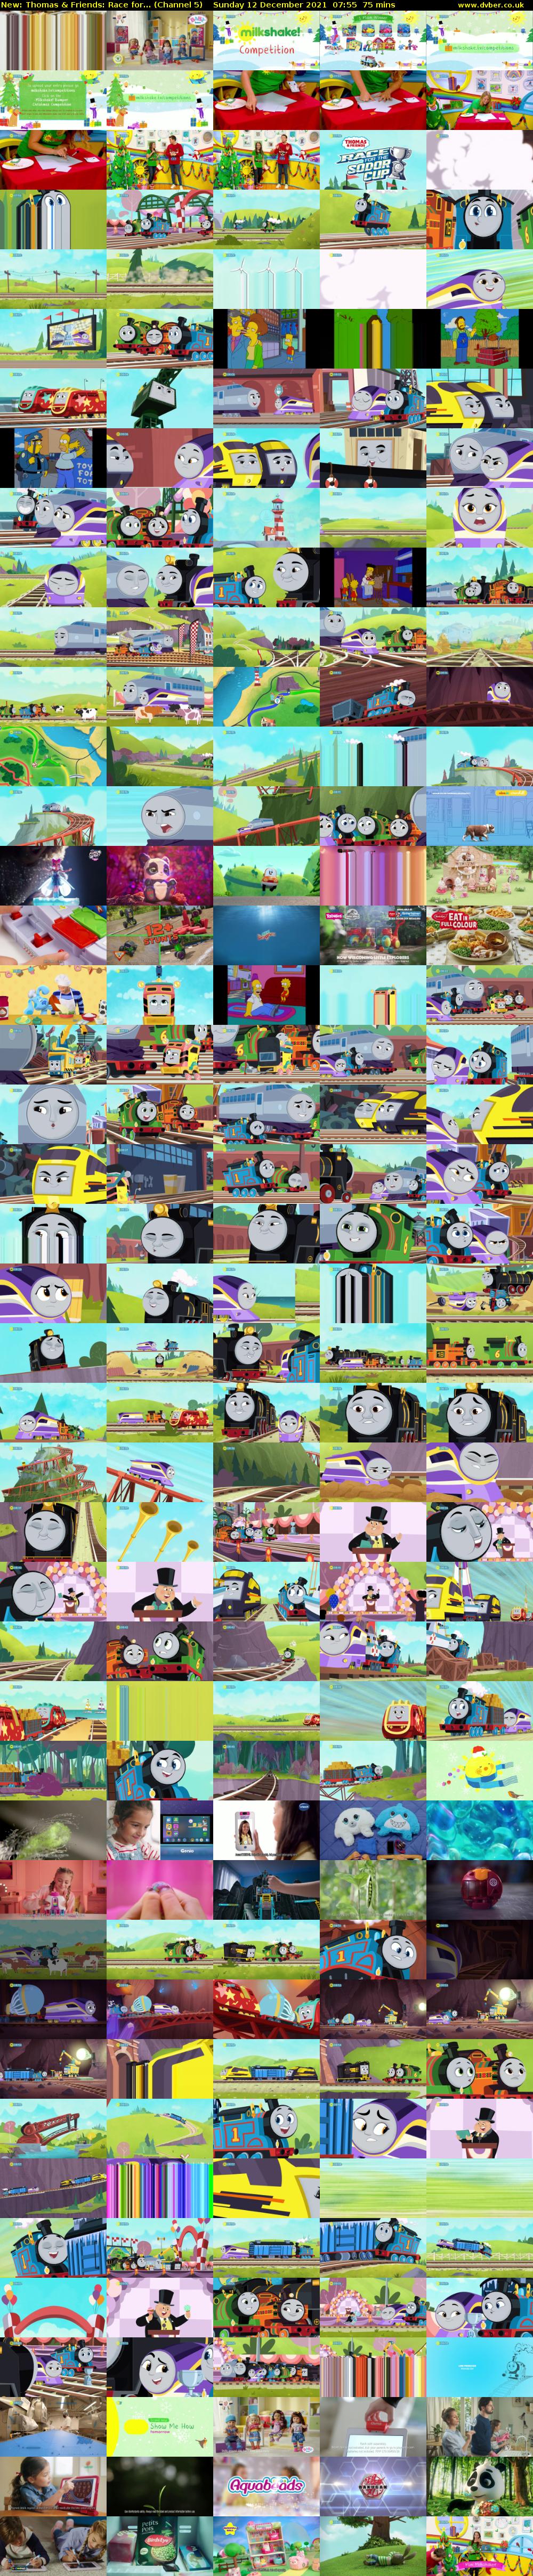 Thomas & Friends: Race for... (Channel 5) Sunday 12 December 2021 07:55 - 09:10